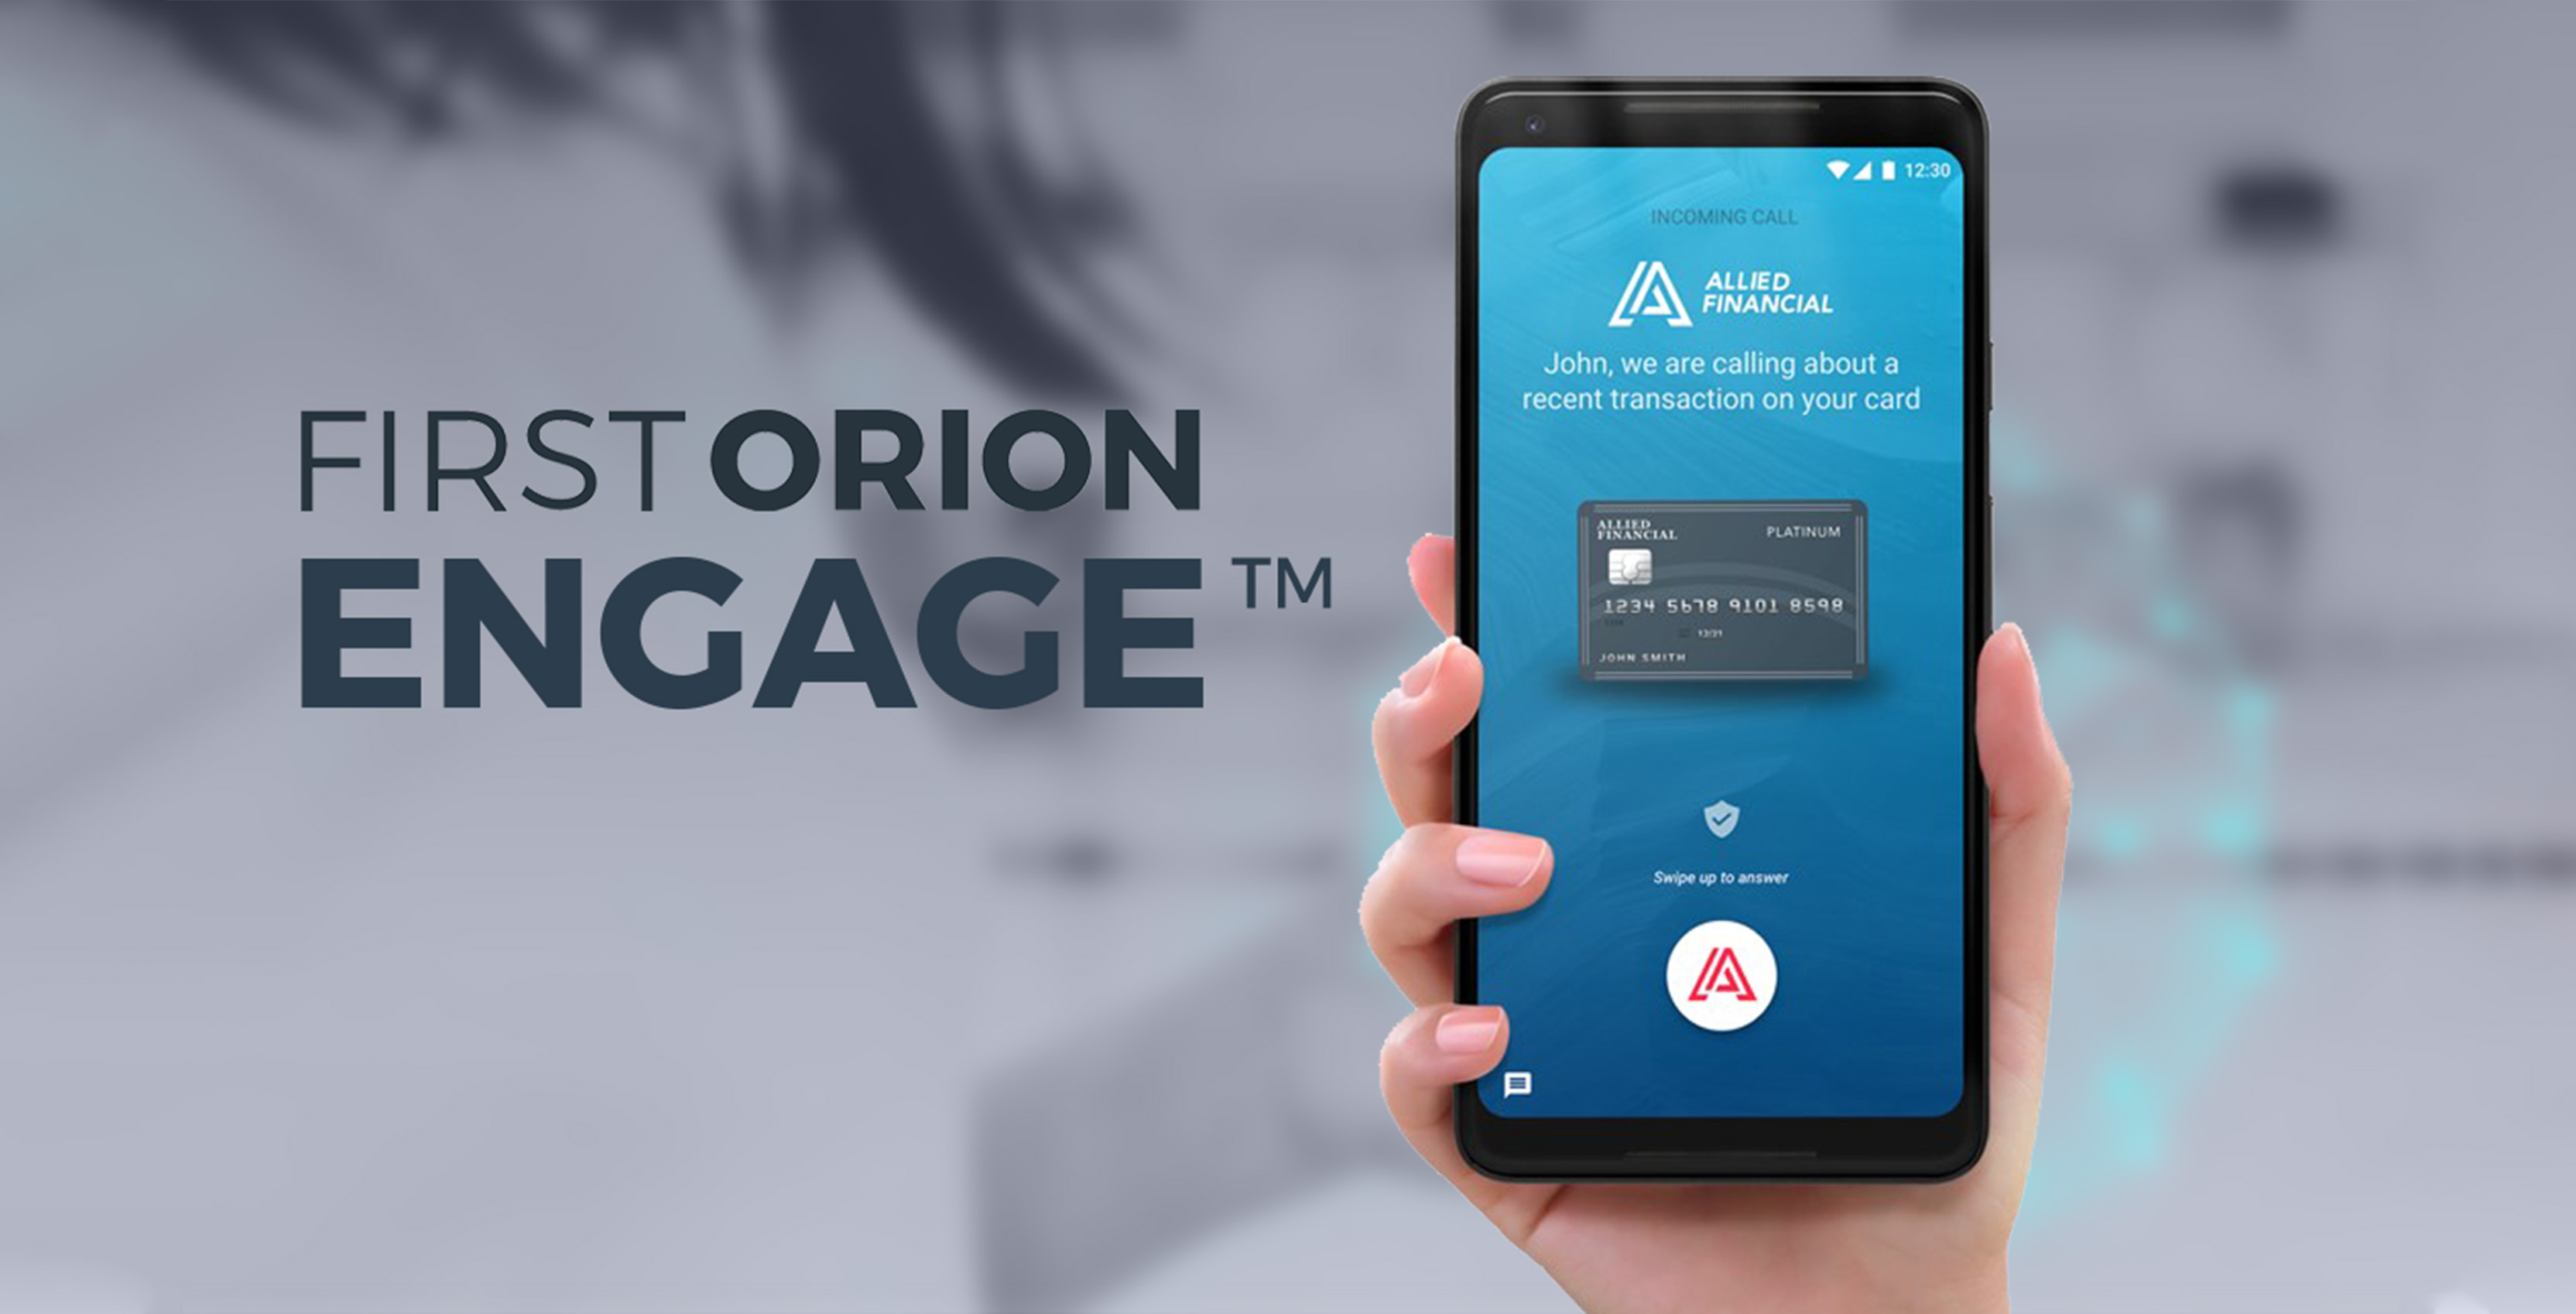 First Orion Engage